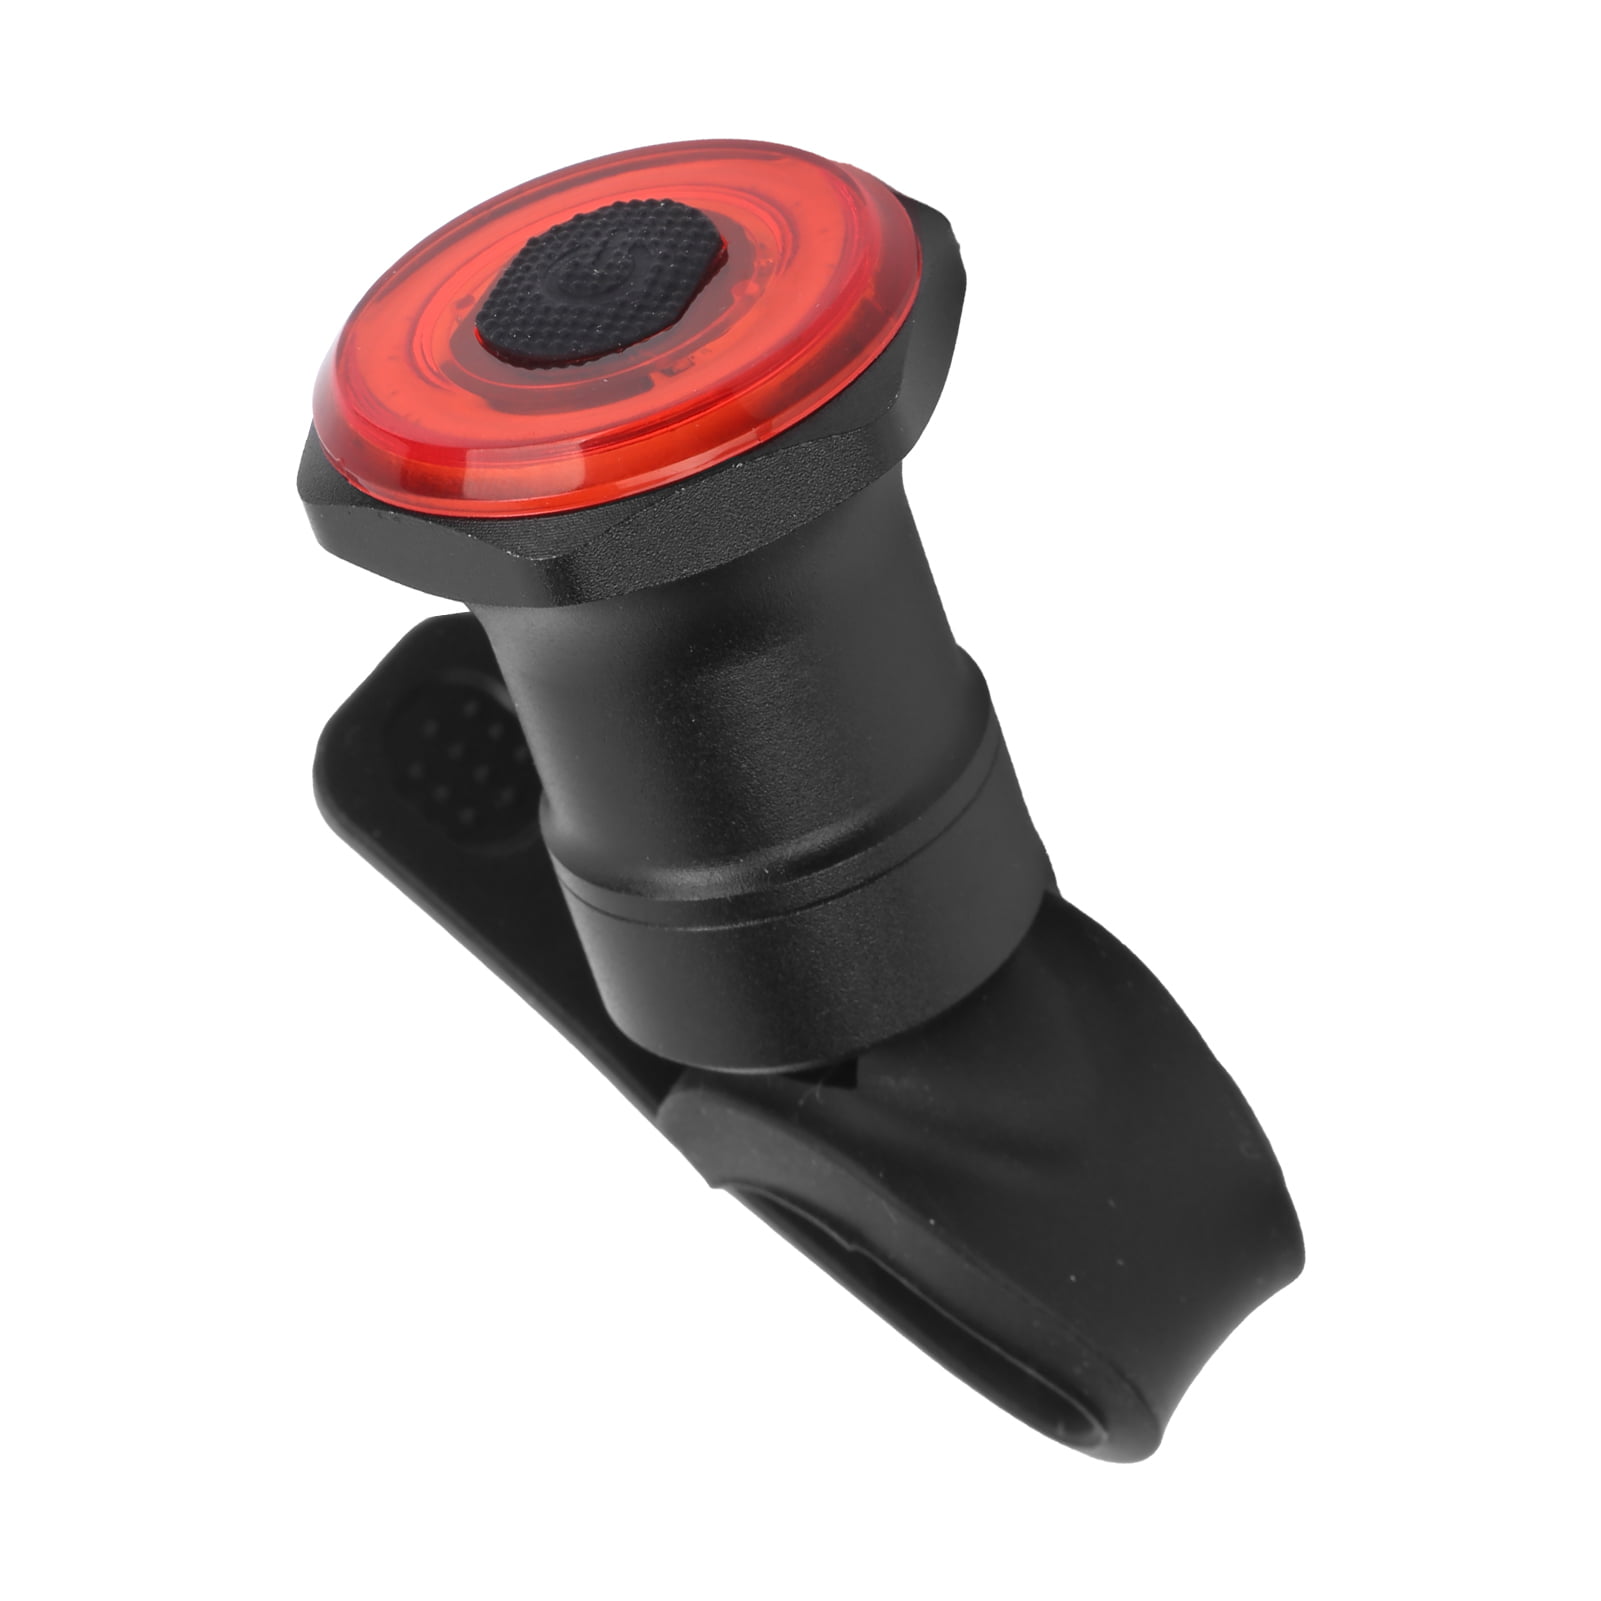 Details about  / Bicycle LED Taillight Seatpost USB Charging Induction Bike Rear Warning Light